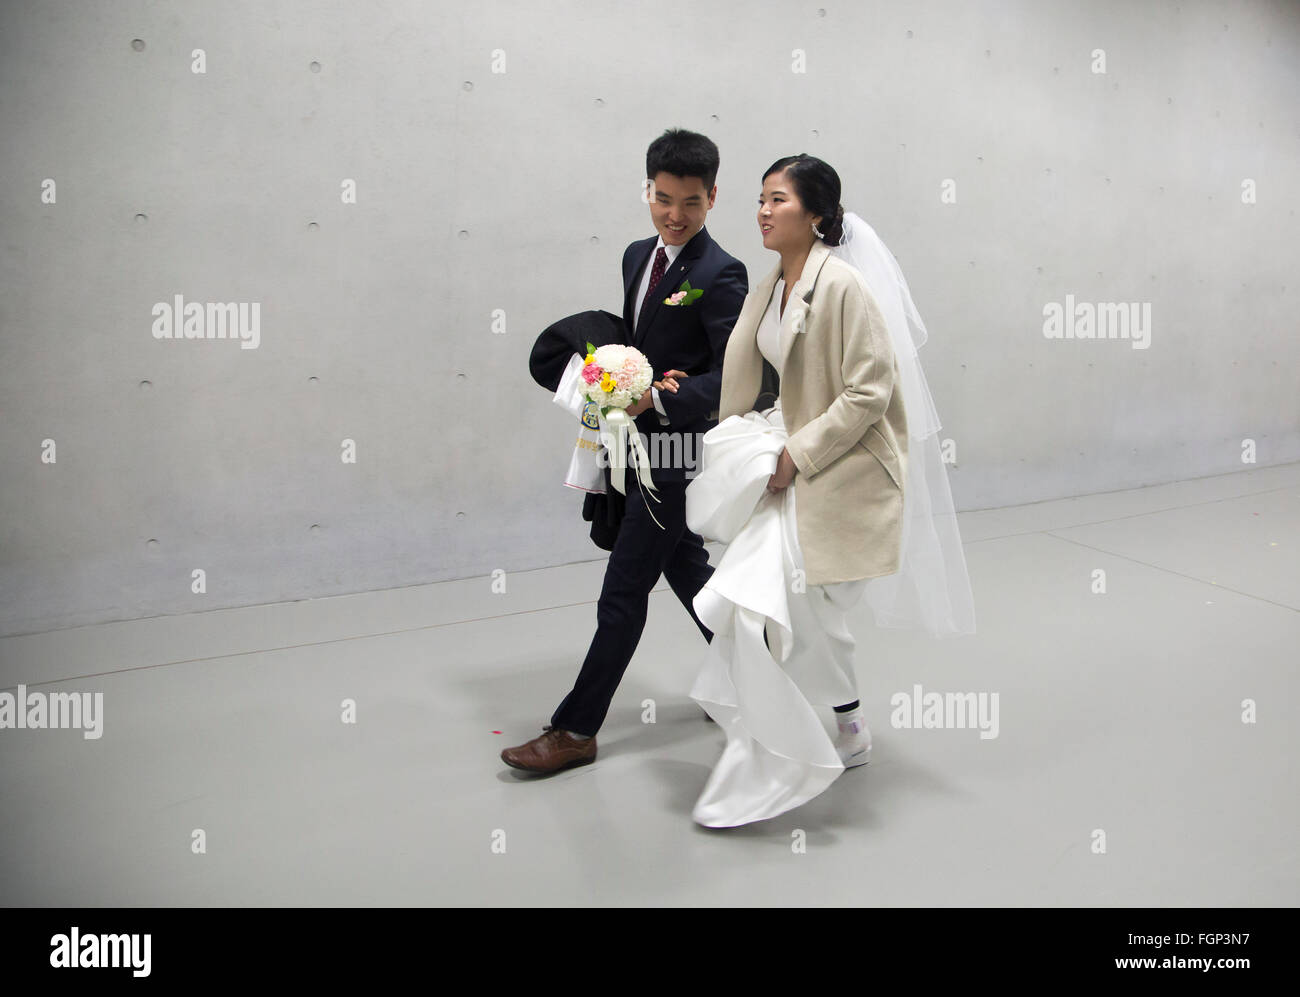 Unification Church's mass wedding, Feb 20, 2016 : Newlyweds walk after a mass wedding ceremony of the Unification Church at the Cheong Shim Peace World Center in Gapyeong, about 60 km (37 miles) east of Seoul, South Korea.The church said about 3,000 couples from more than 60 countries participated in the mass wedding in Gapyeong and other 12,000 couples attended in the wedding ceremony through live-streamed broadcast, which was organized by Han Hak-Ja, widow of the late Rev. Moon Sun-Myung, founder of the Unification Church. © Lee Jae-Won/AFLO/Alamy Live News Stock Photo